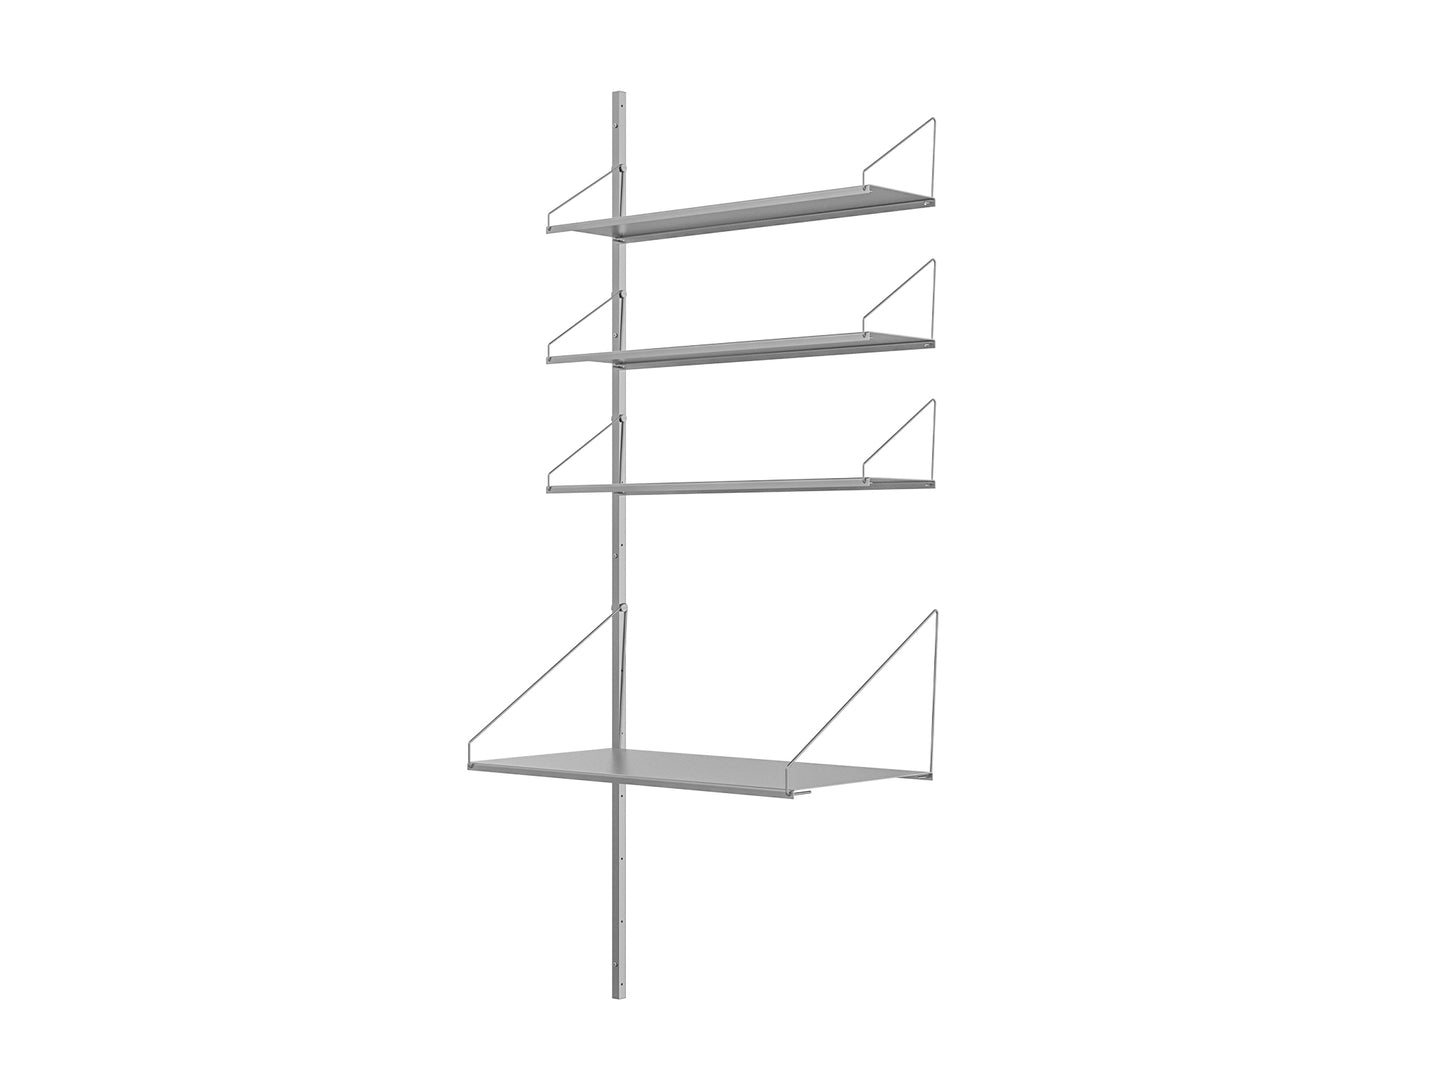 Shelf Library Stainless Steel Add-ons by Frama - H1852 / Desk Section